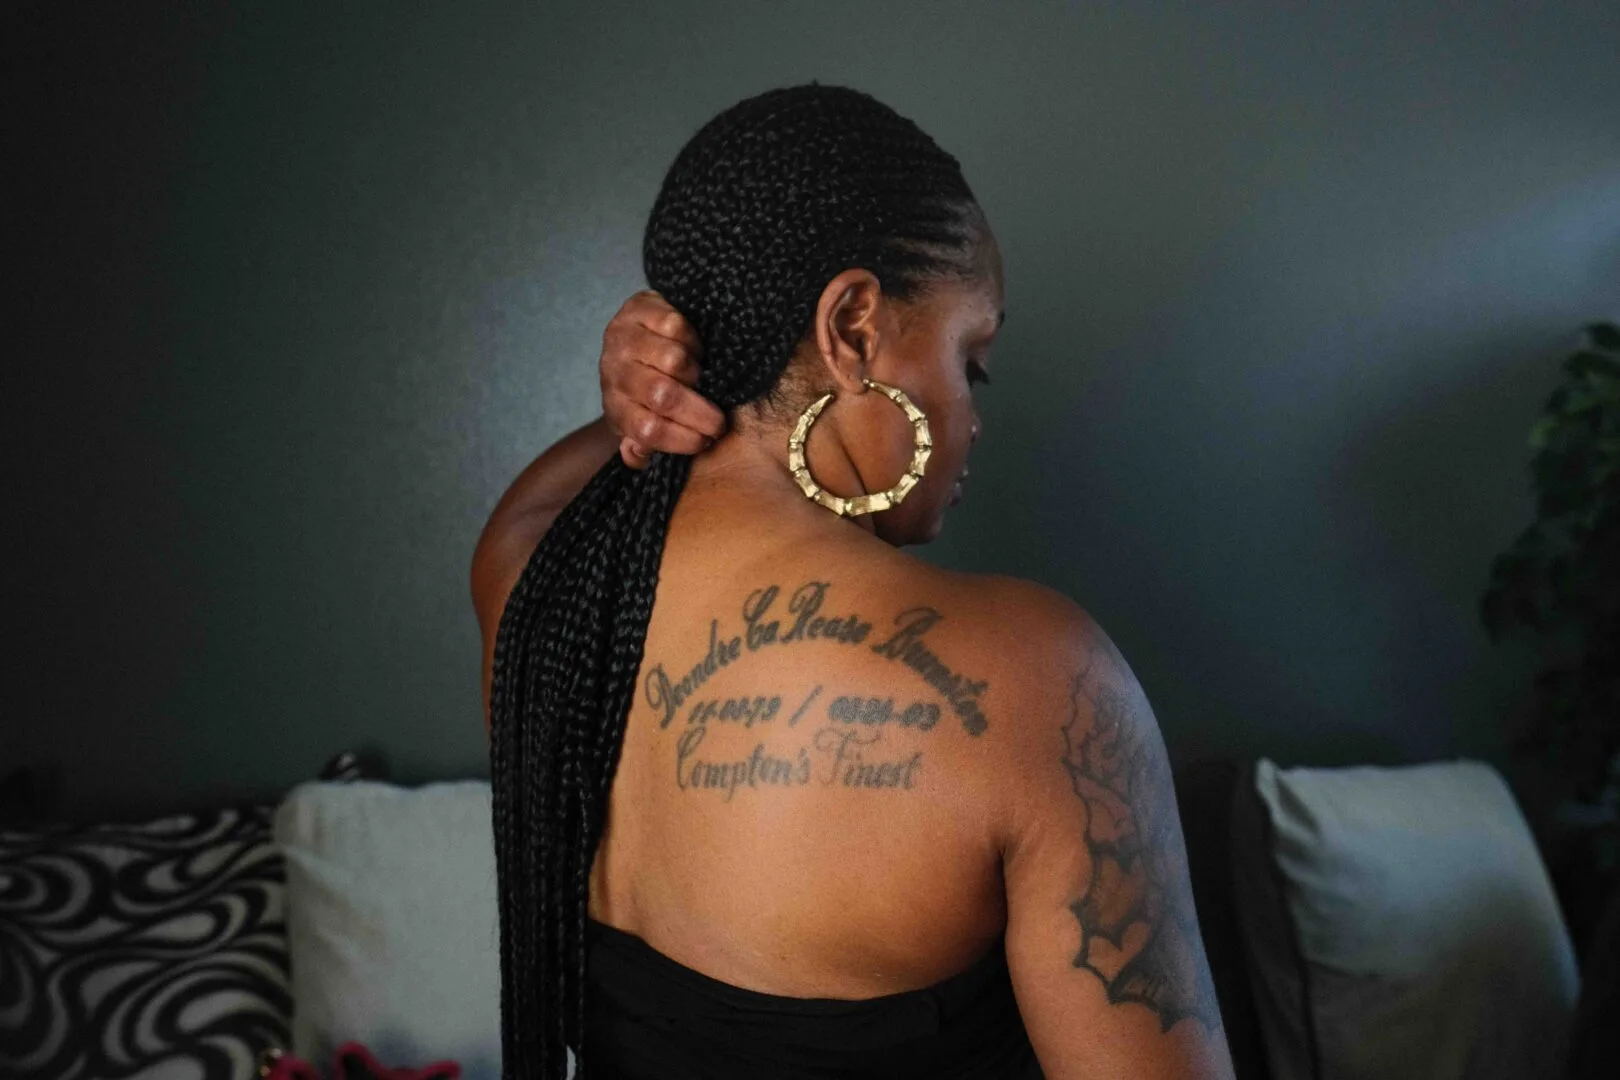 Keishia Brunston, a Black woman, shows a back tattoo commemorating the life of her nephew Deondre Brunston. It shows his name, date of birth and death, and says 